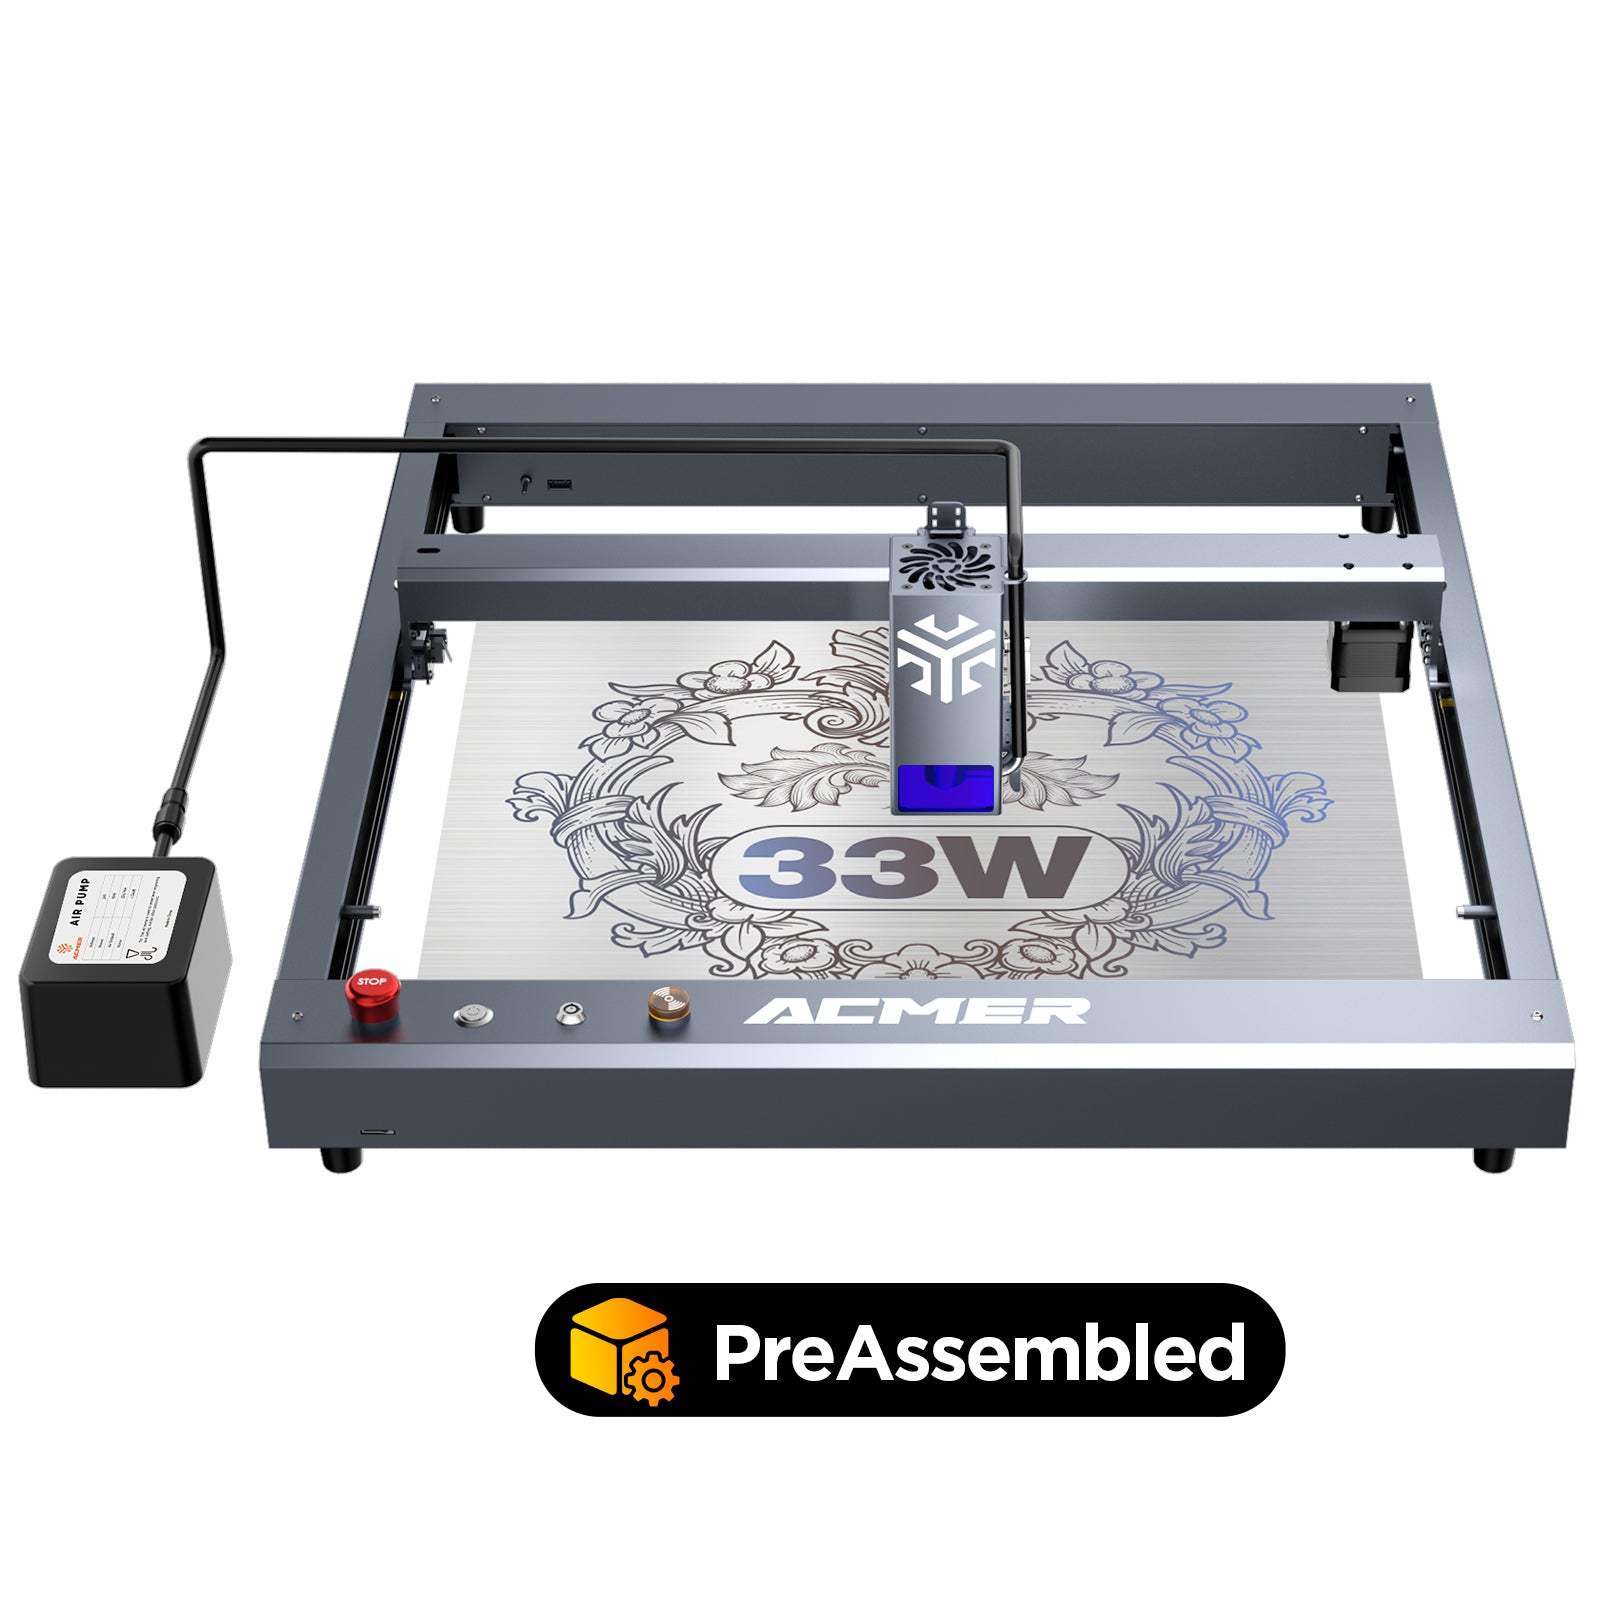 Official Refurbished-ACMER P2 33W Laser Engraver Cutting Machine